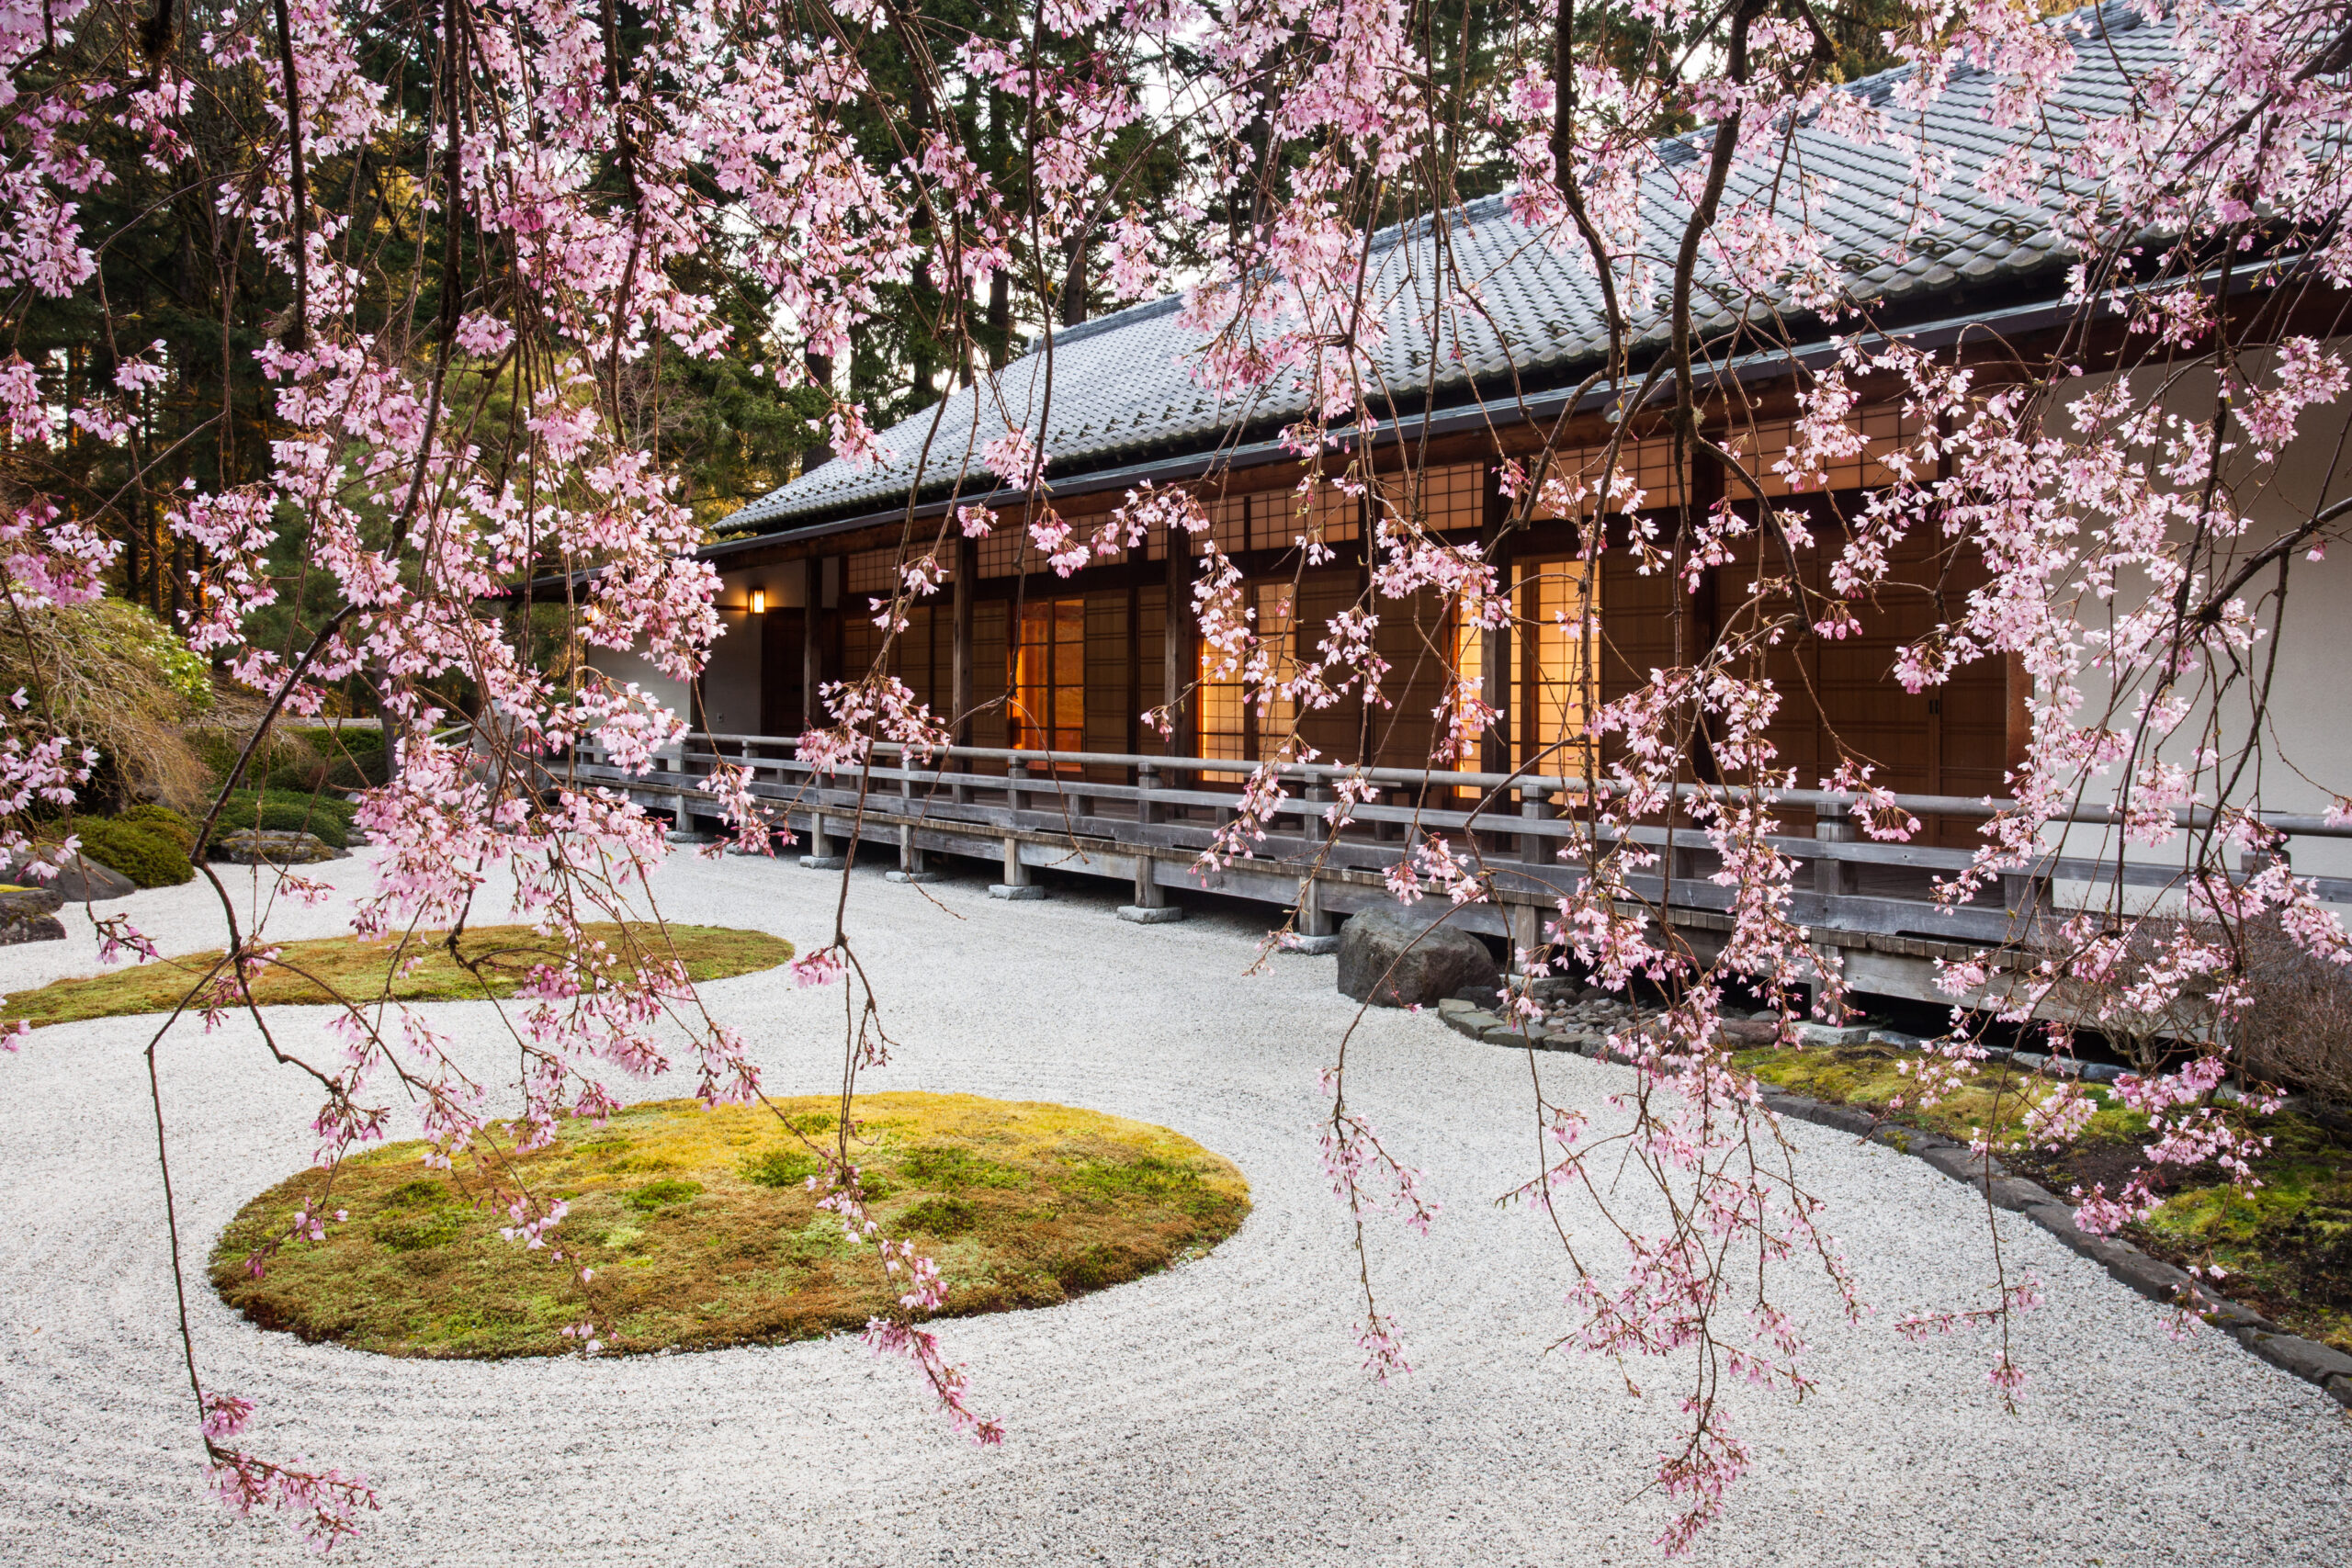 23 of the best places to see cherry blossom trees bloom in the US